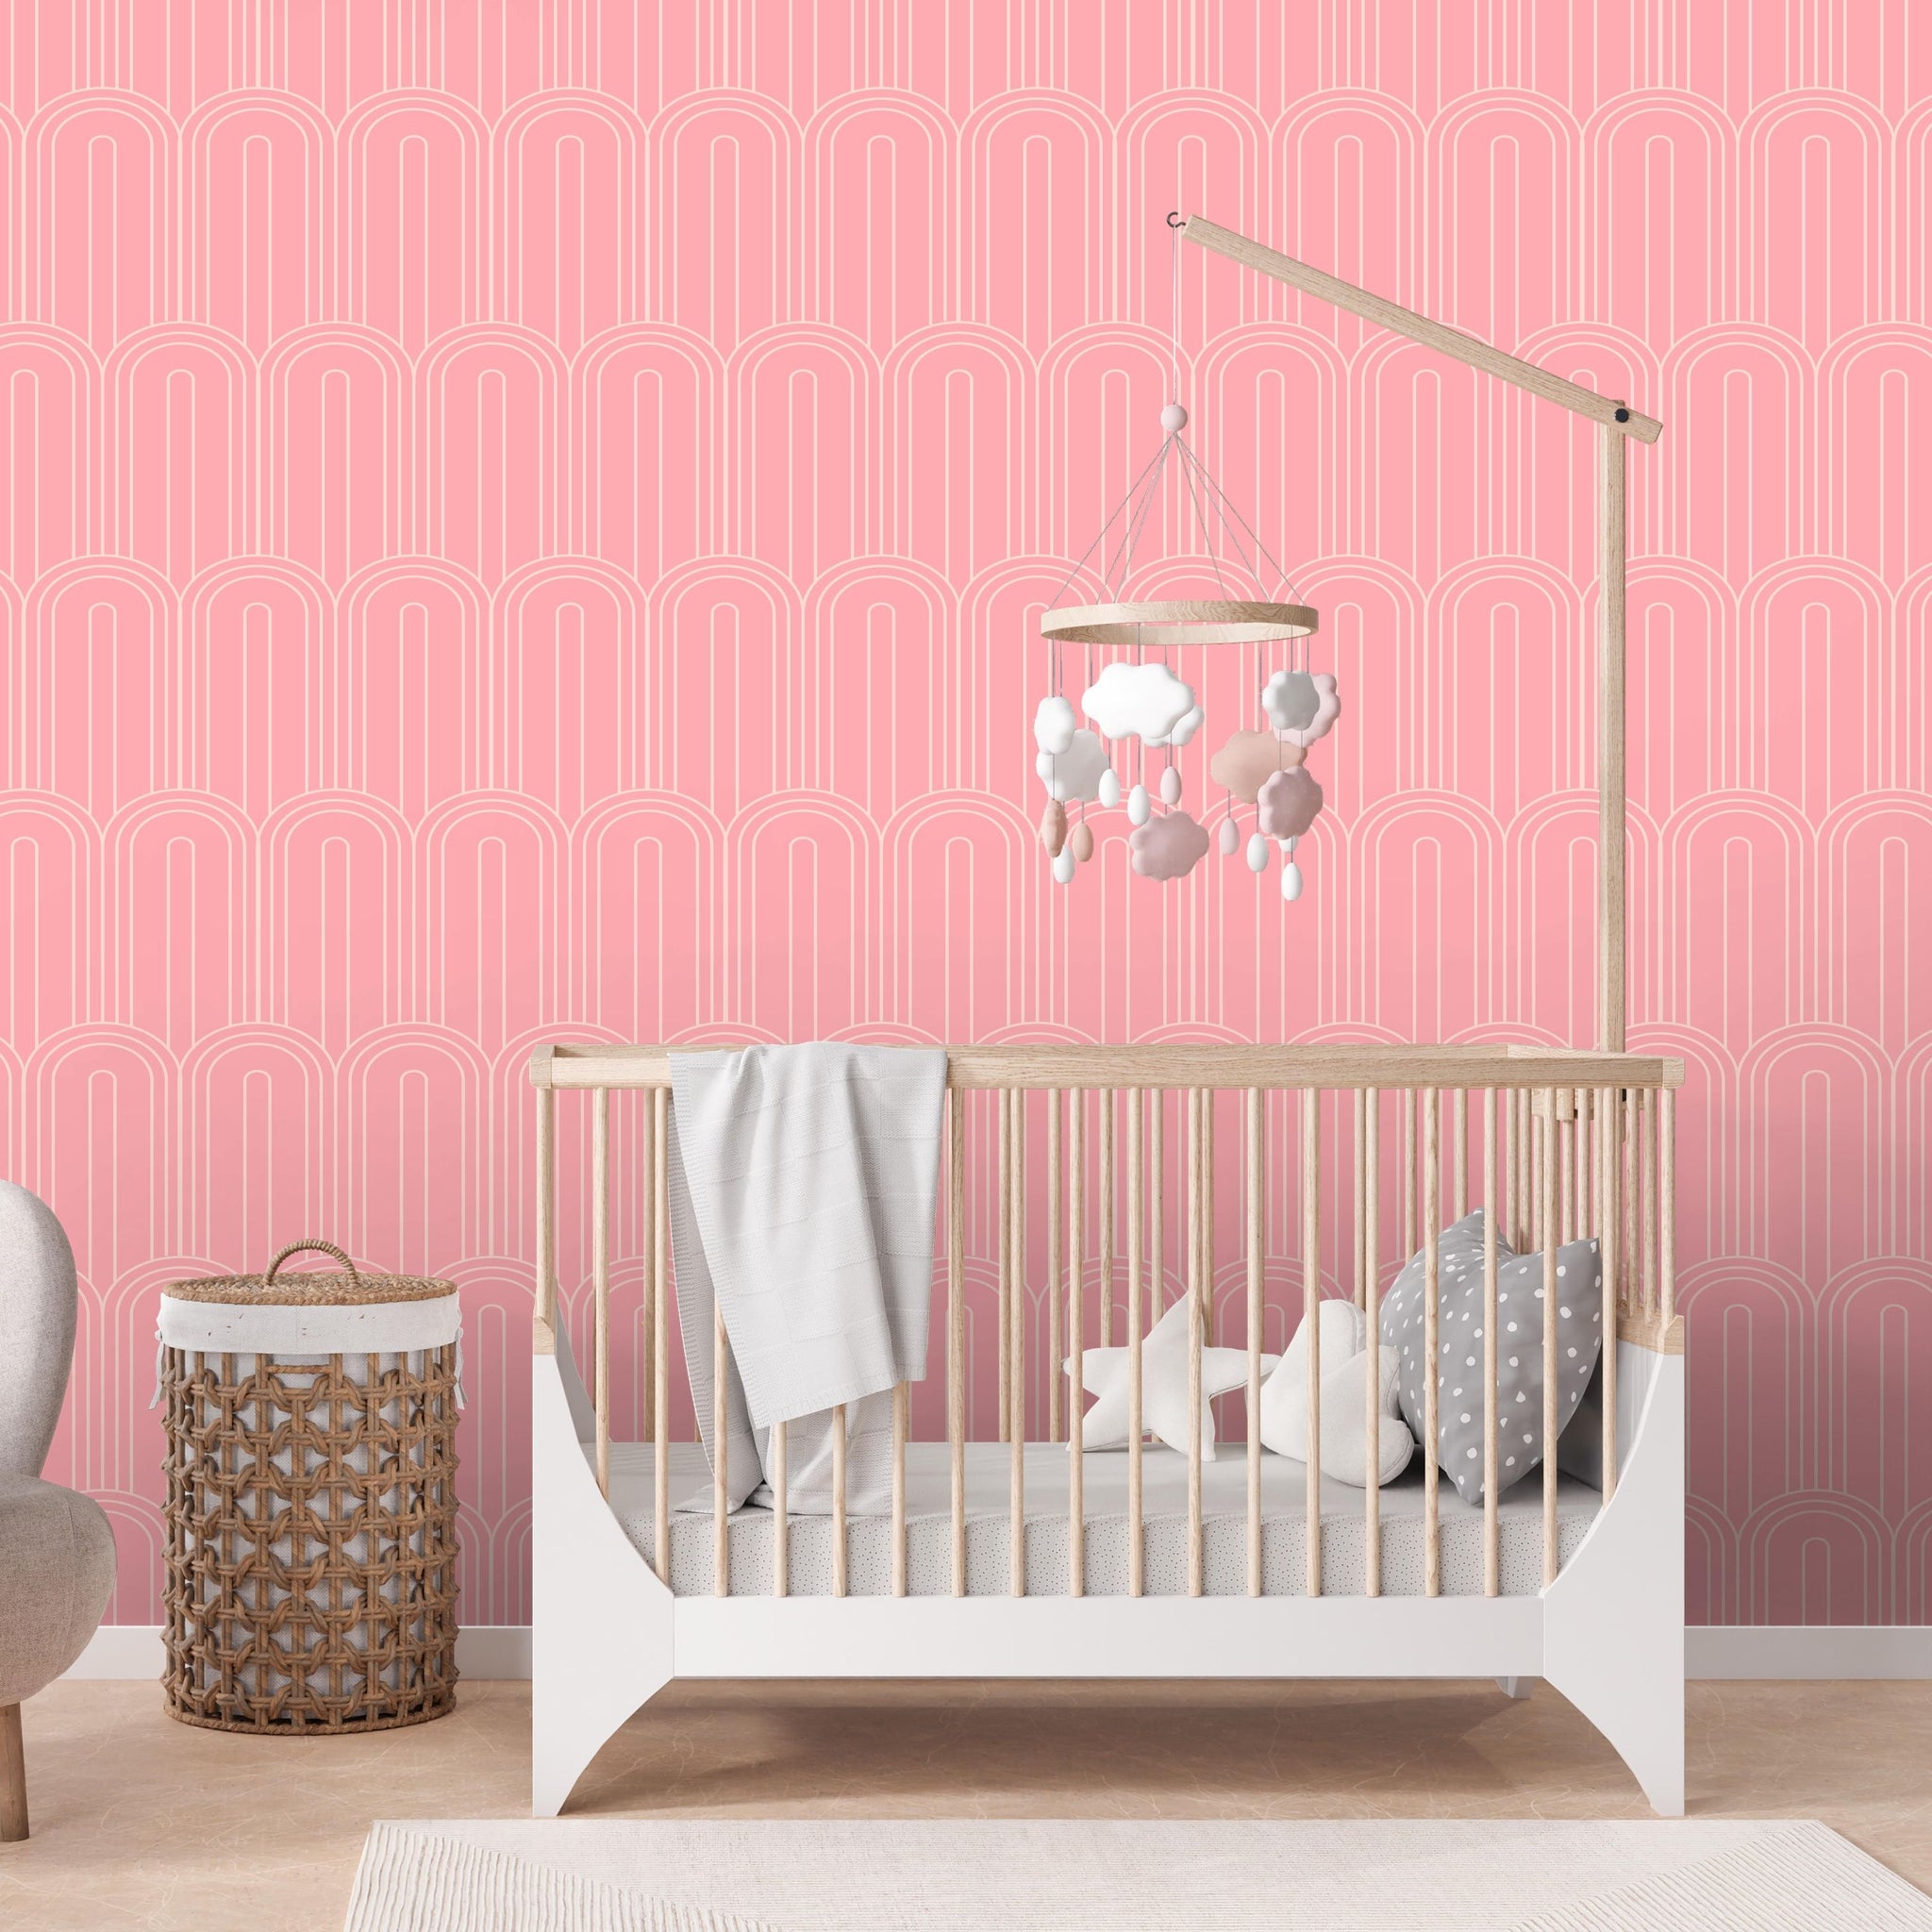 Peel and Stick or Traditional Wallpaper - Pink Bows